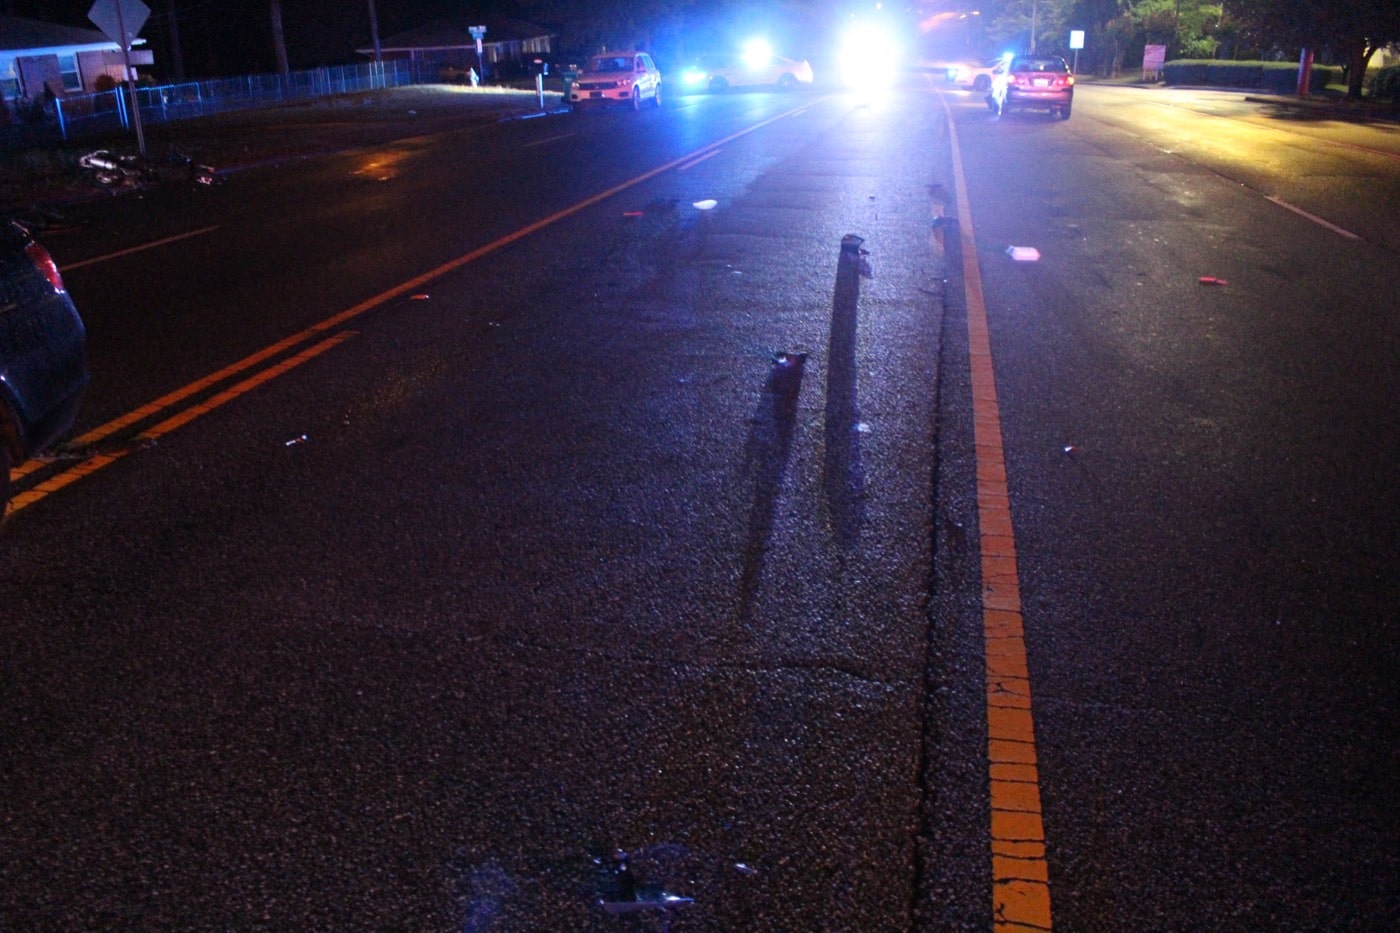 70-year-old motorcycle driver killed in early morning crash